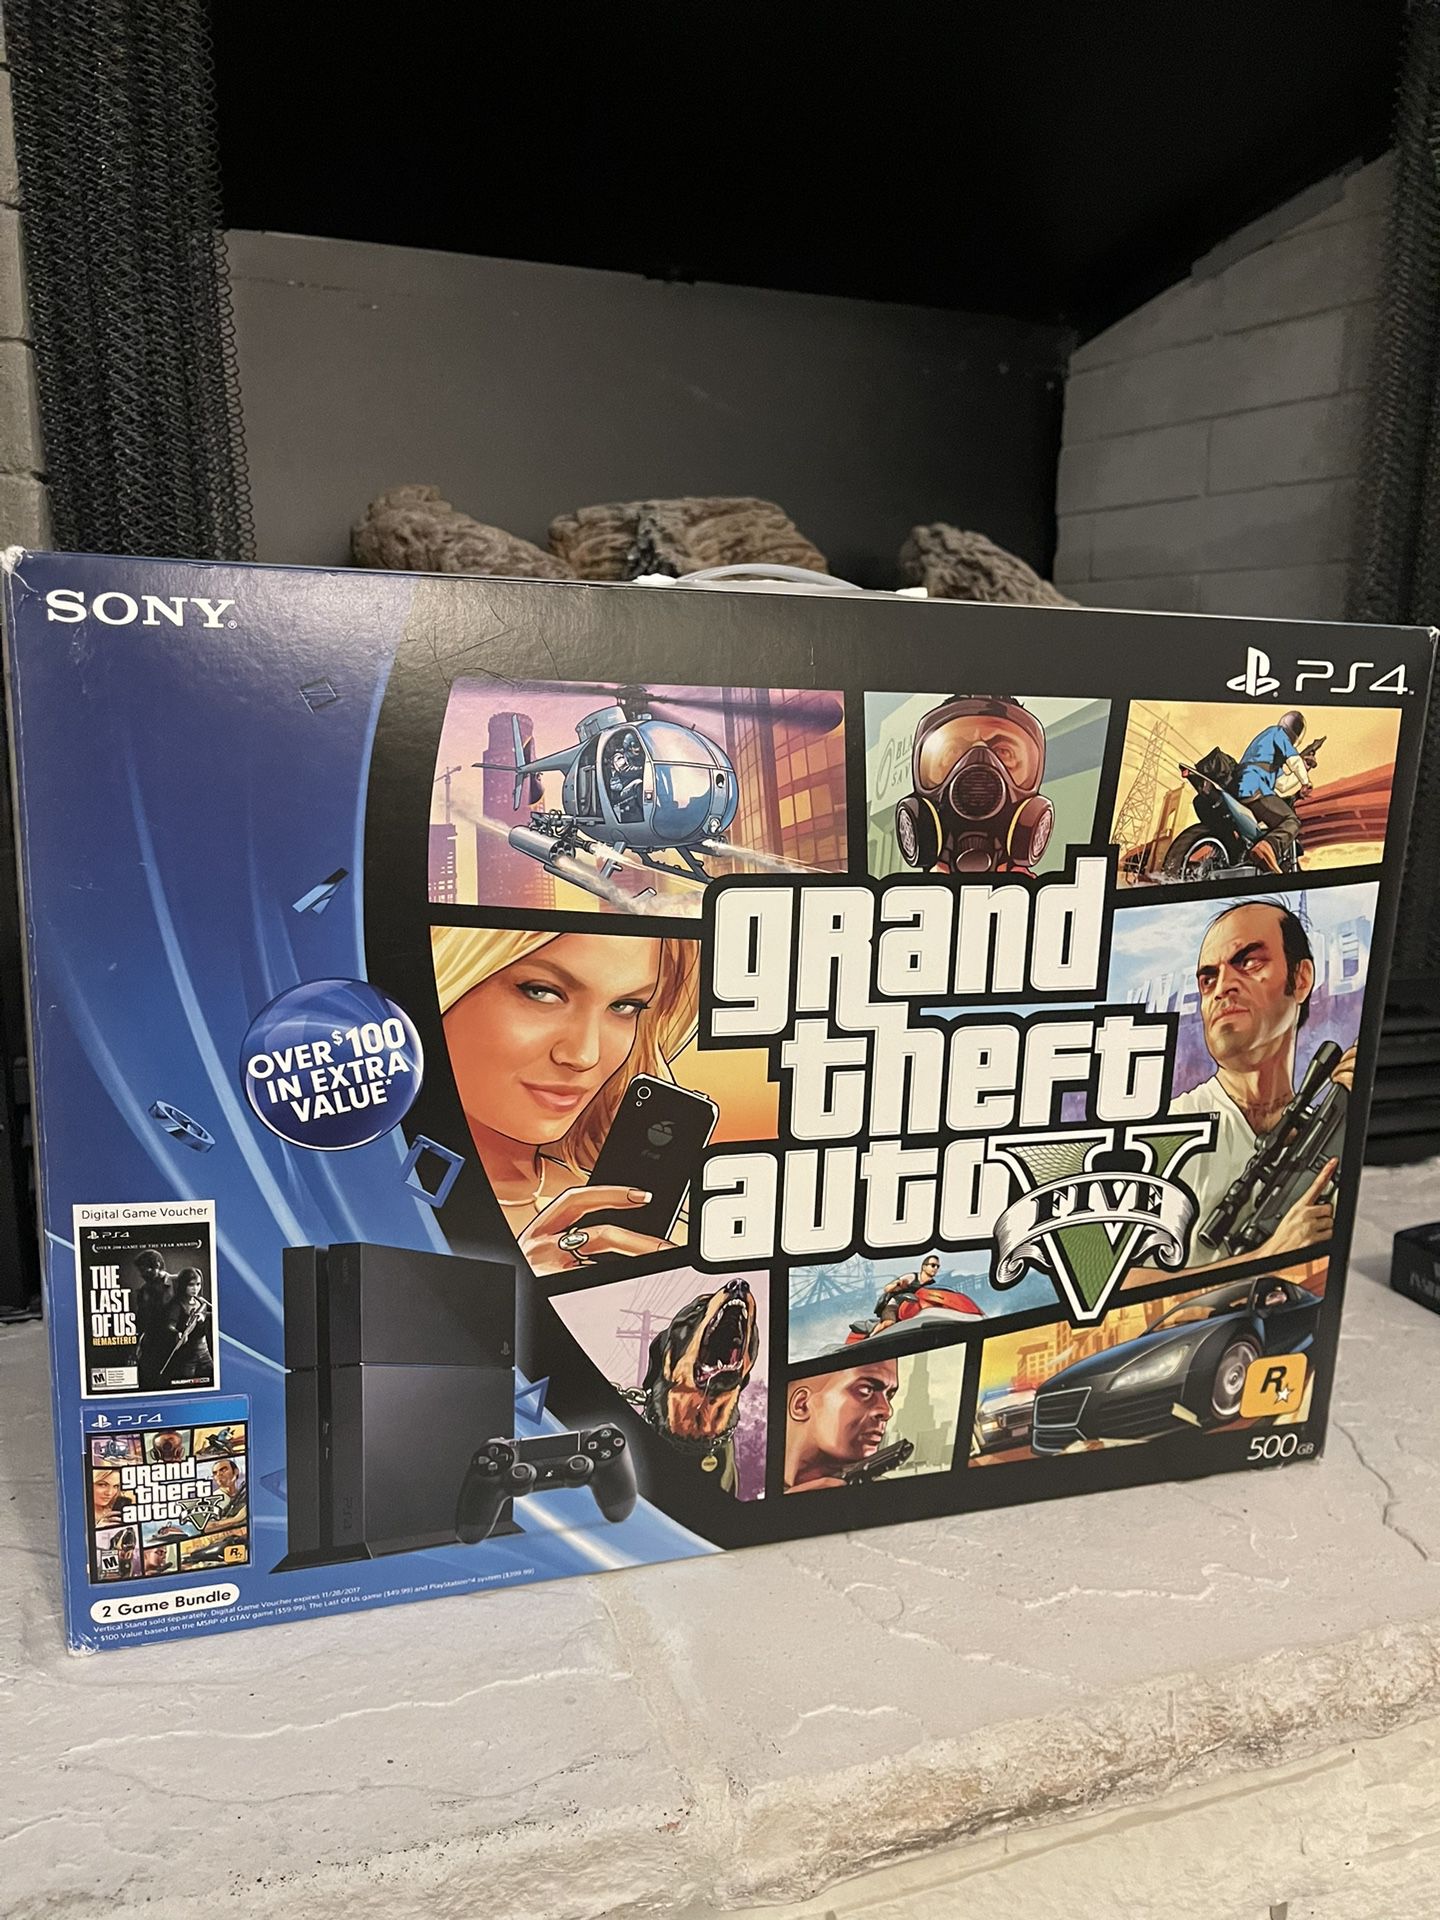 PS4 with GTA V disc 